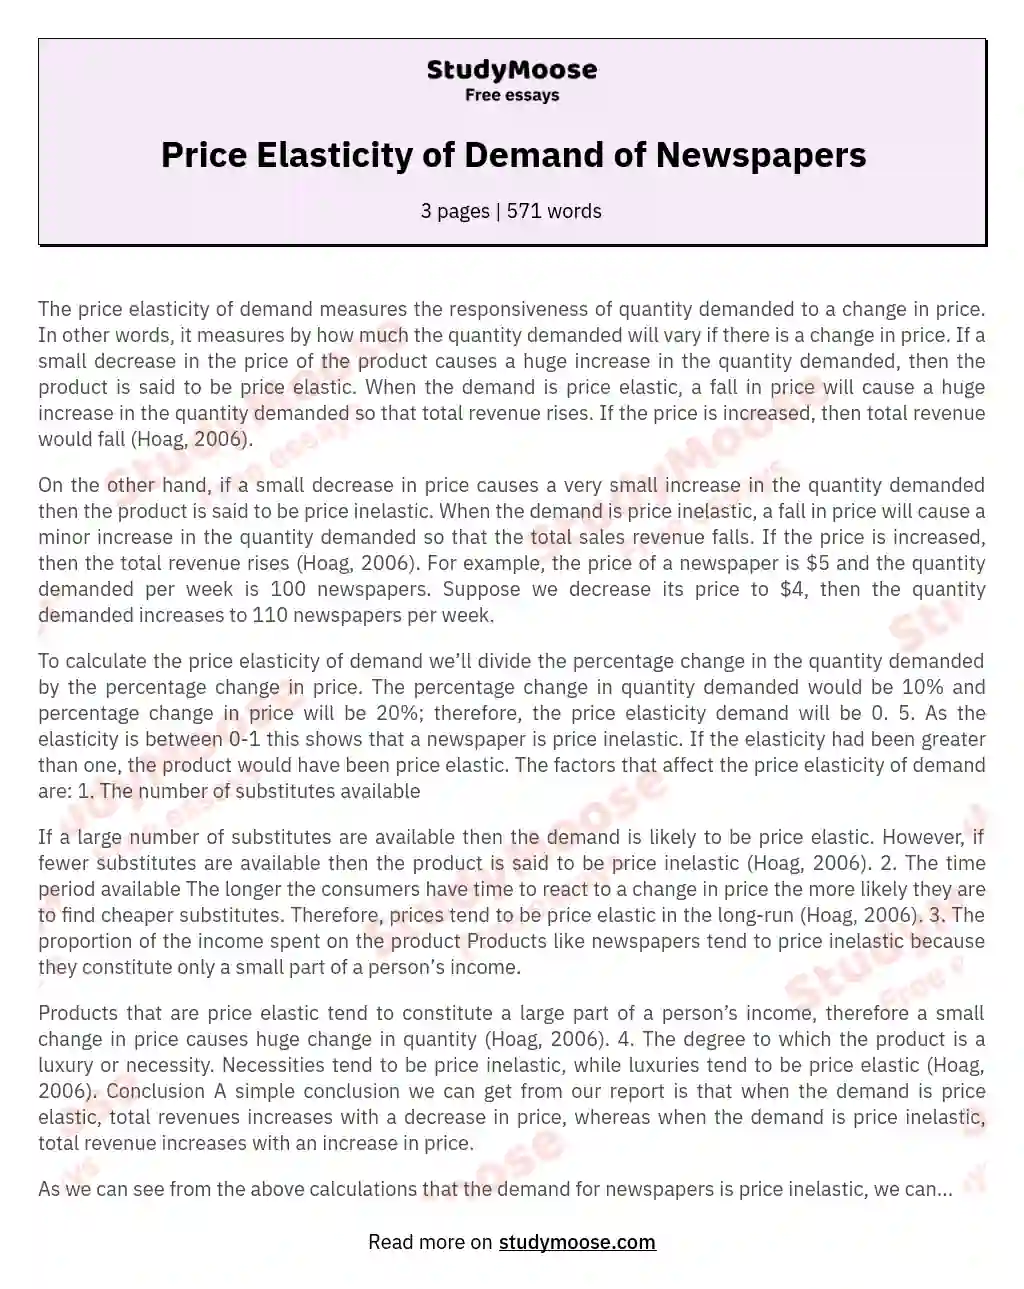 Price Elasticity of Demand of Newspapers